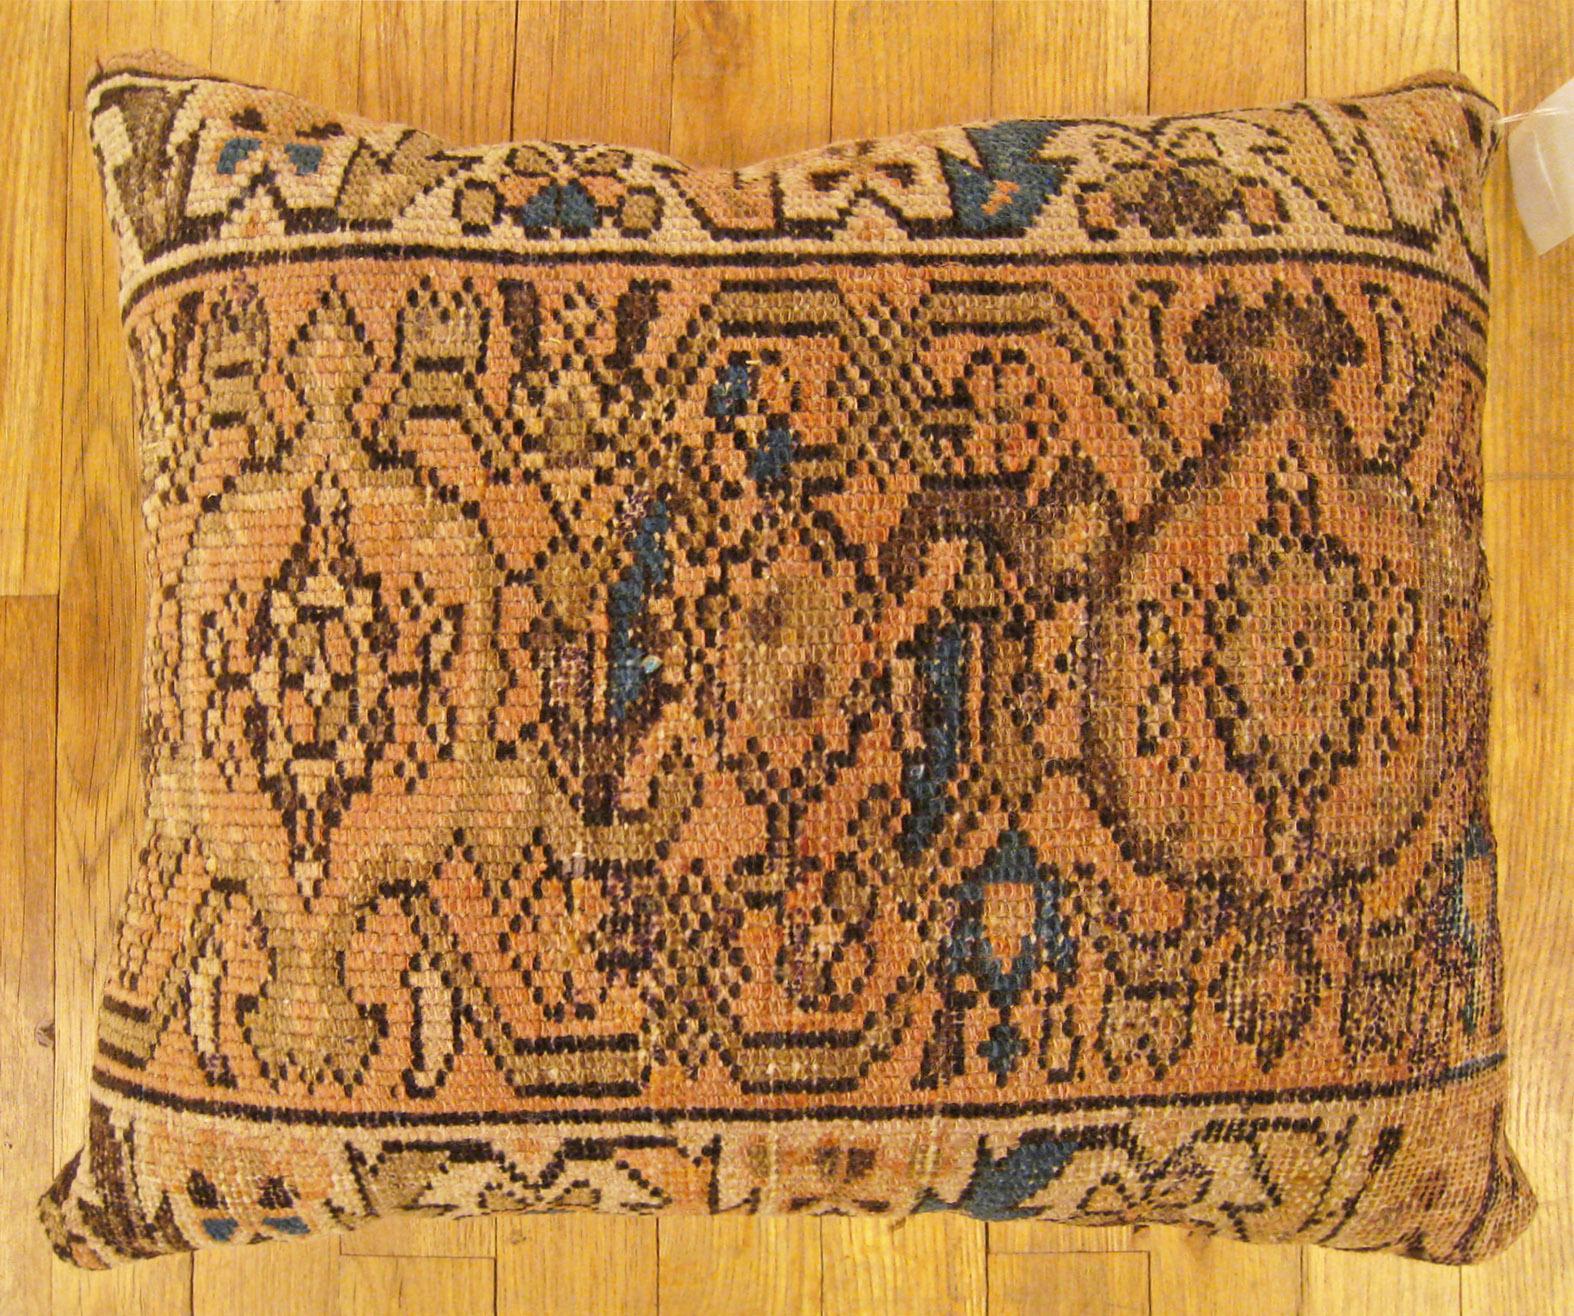 Antique Persian Hamadan Rug Pillow; size 1'8” x 1'4”.

An antique decorative pillow with geometric abstracts allover a light brown central field, size 1'8” x 1'4”. This lovely decorative pillow features an antique fabric of a Hamadan rug on front